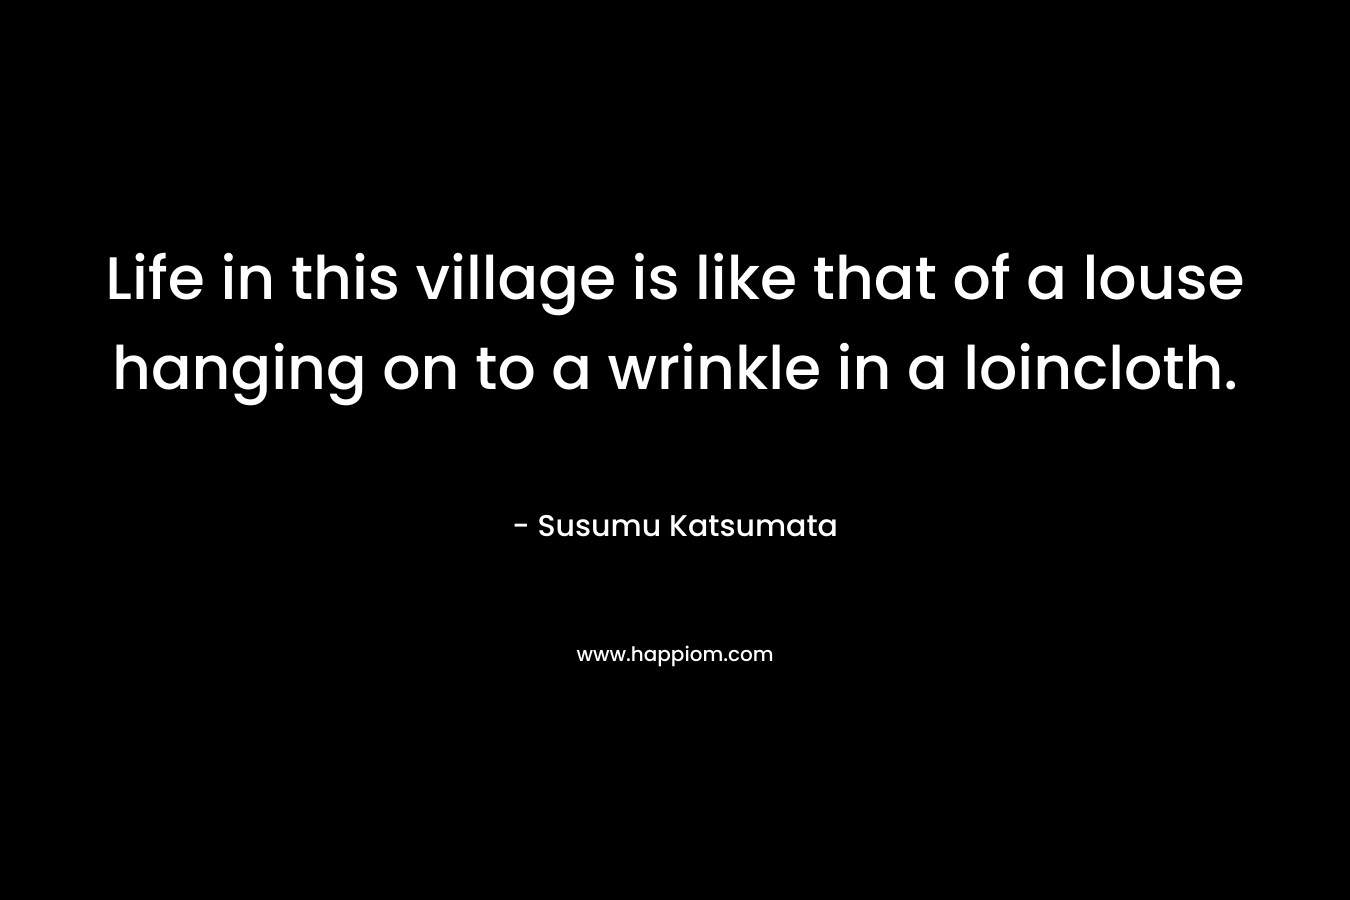 Life in this village is like that of a louse hanging on to a wrinkle in a loincloth. – Susumu Katsumata